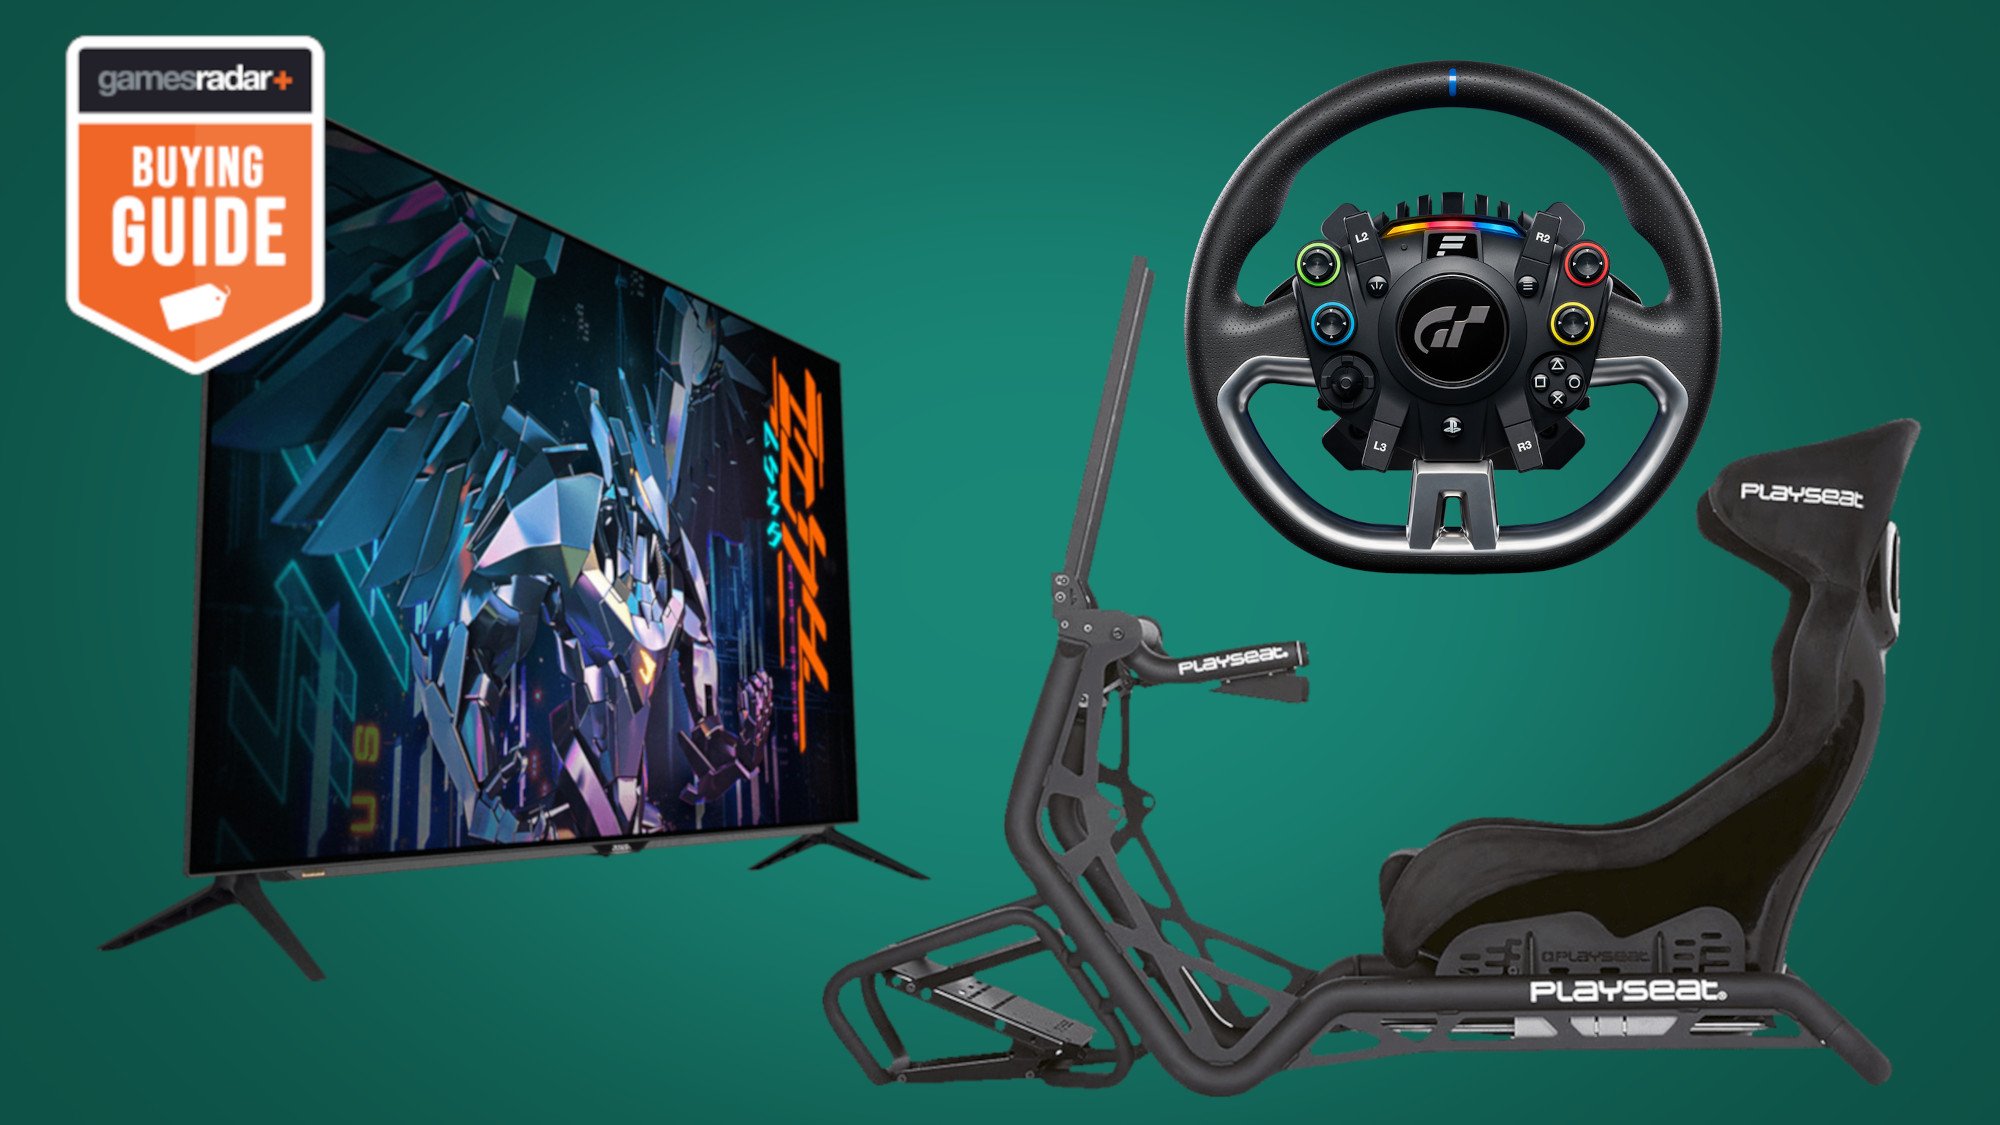 Fanatec launches the ultimate Gran Turismo wheel, but you'll need